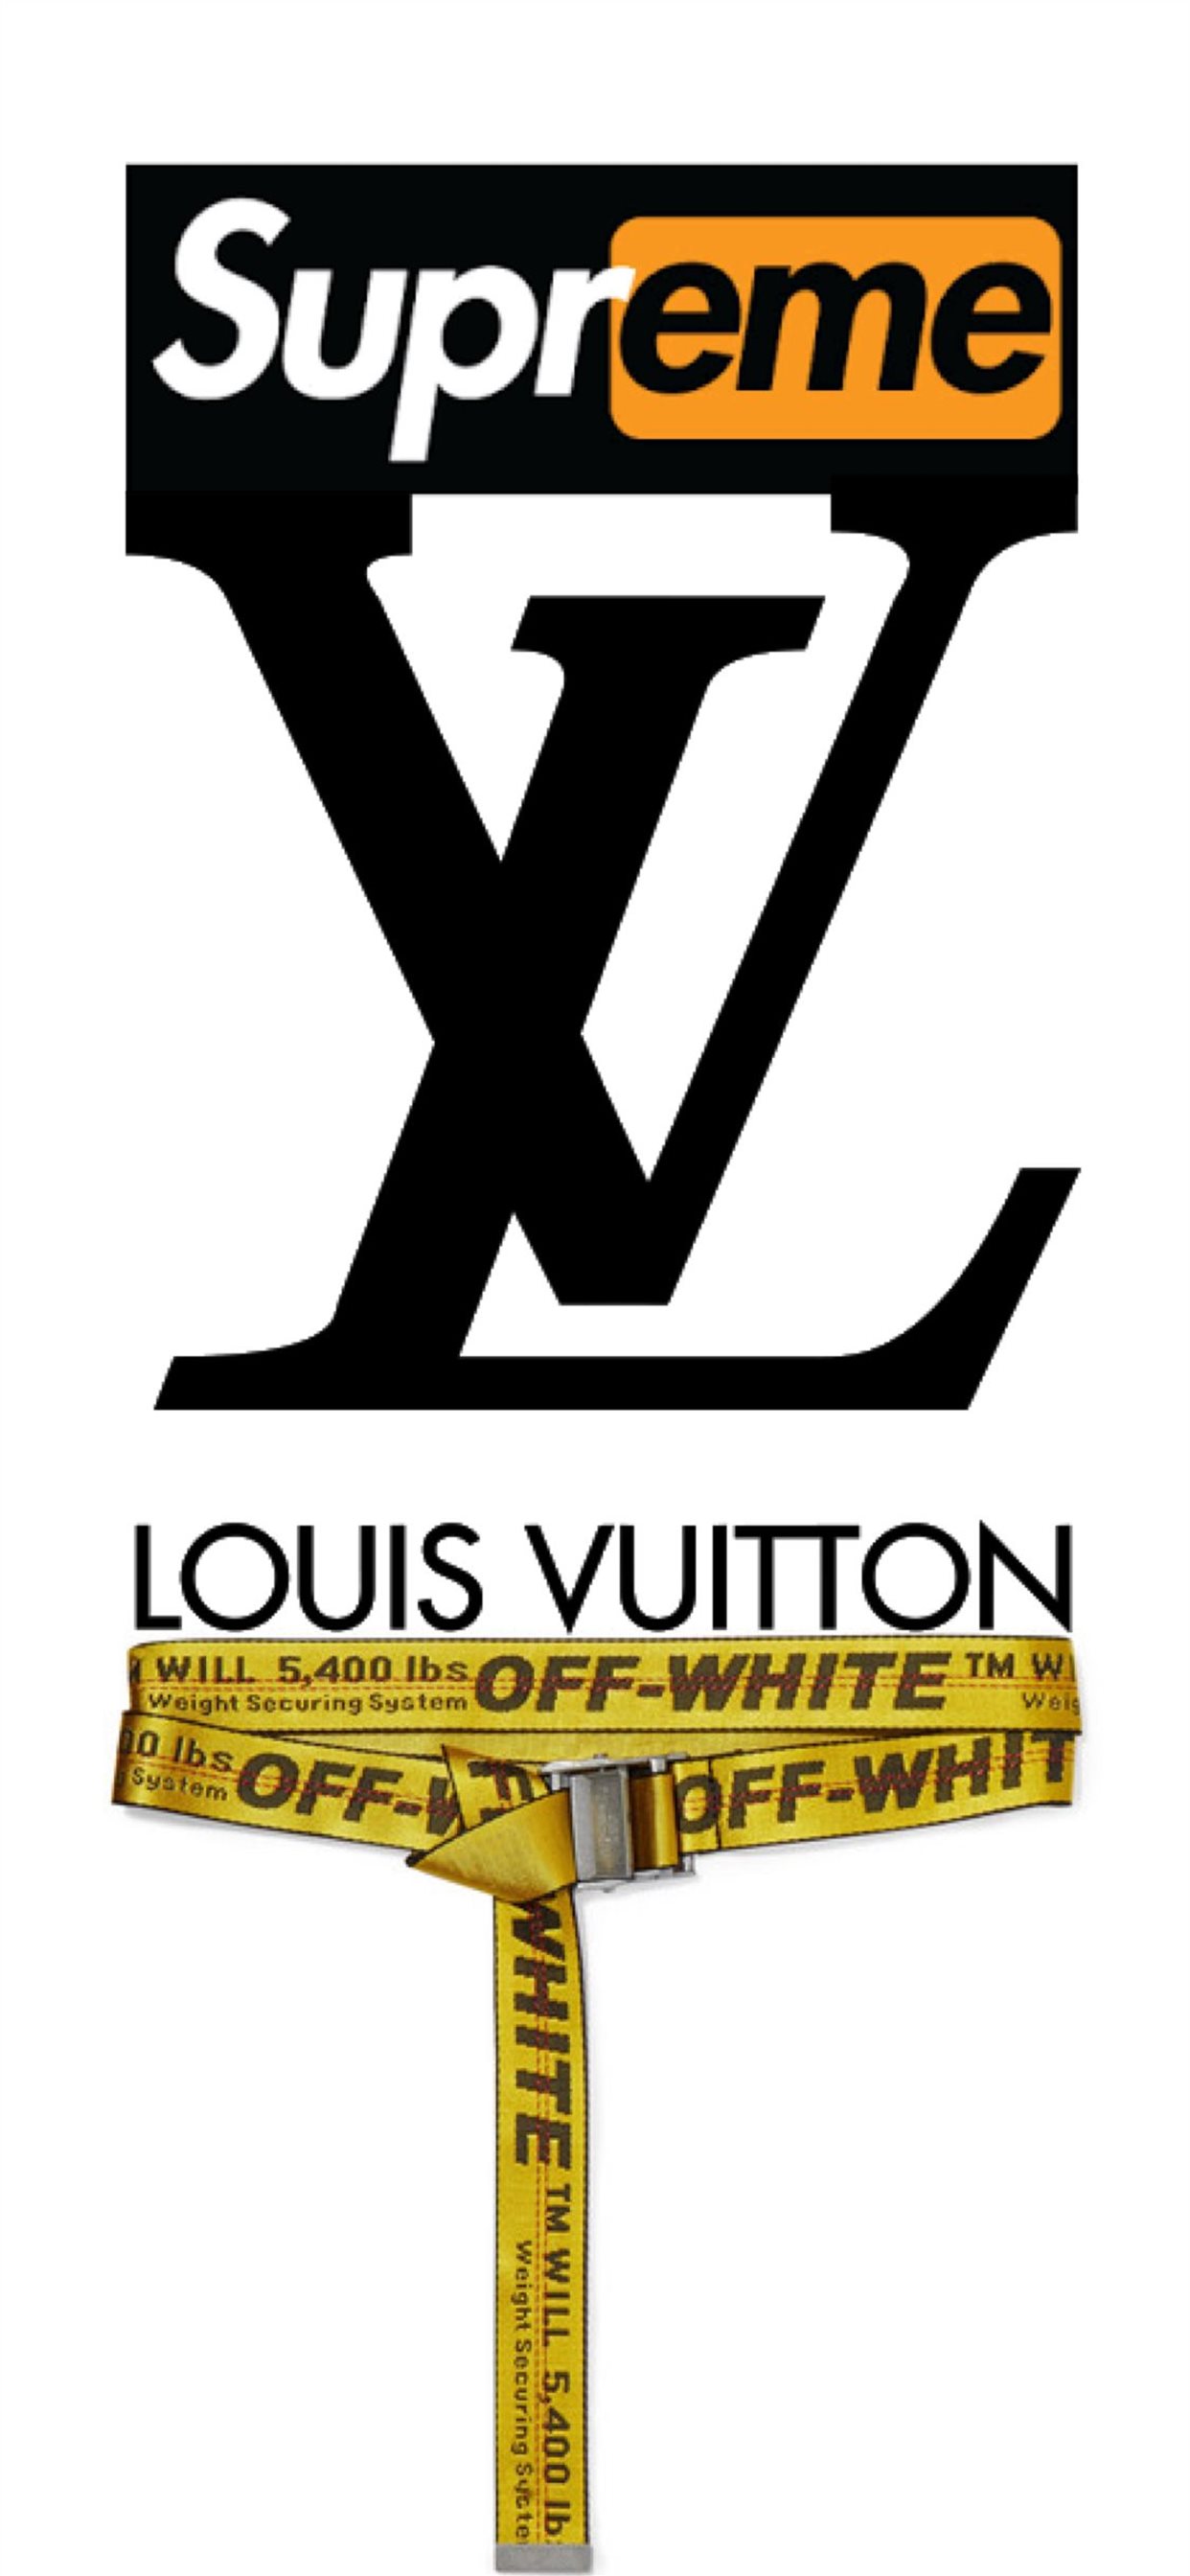  Louis  Vuitton  off white wallpaper  iPhone  Wallpapers  Free 